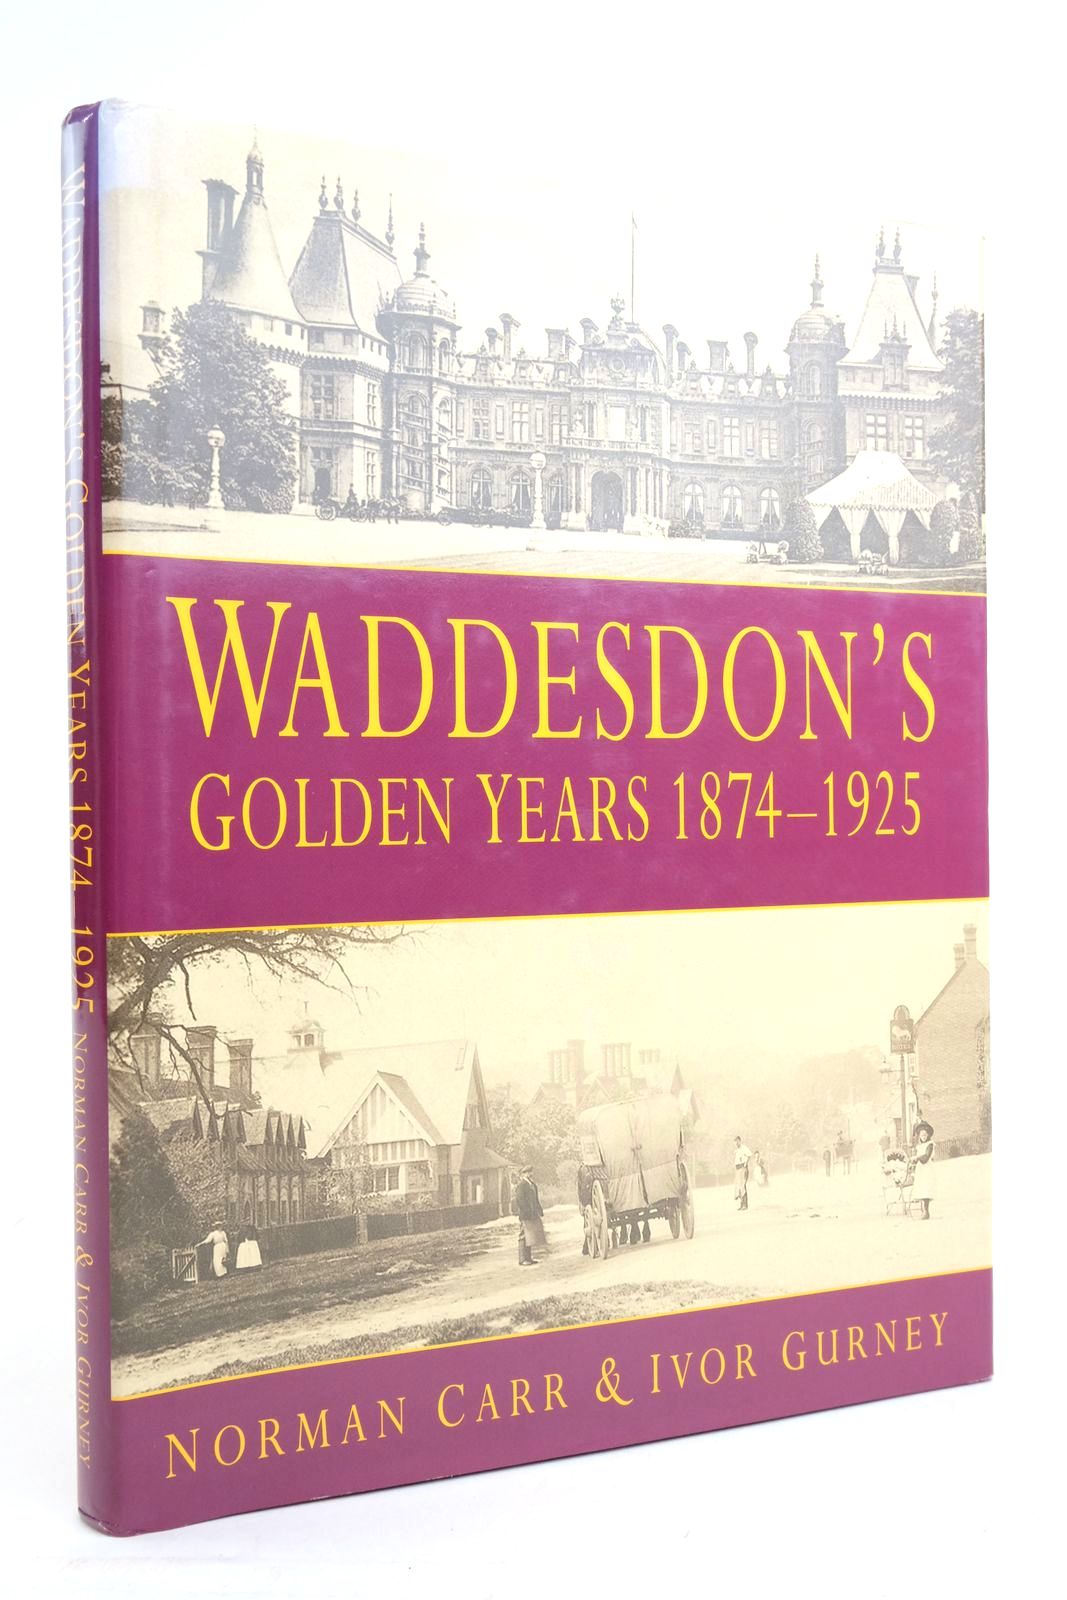 Photo of WADDESDON'S GOLDEN YEARS 1874-1925 written by Carr, Norman Gurney, Ivor published by The Alice Trust, Sutton Publishing (STOCK CODE: 2136618)  for sale by Stella & Rose's Books